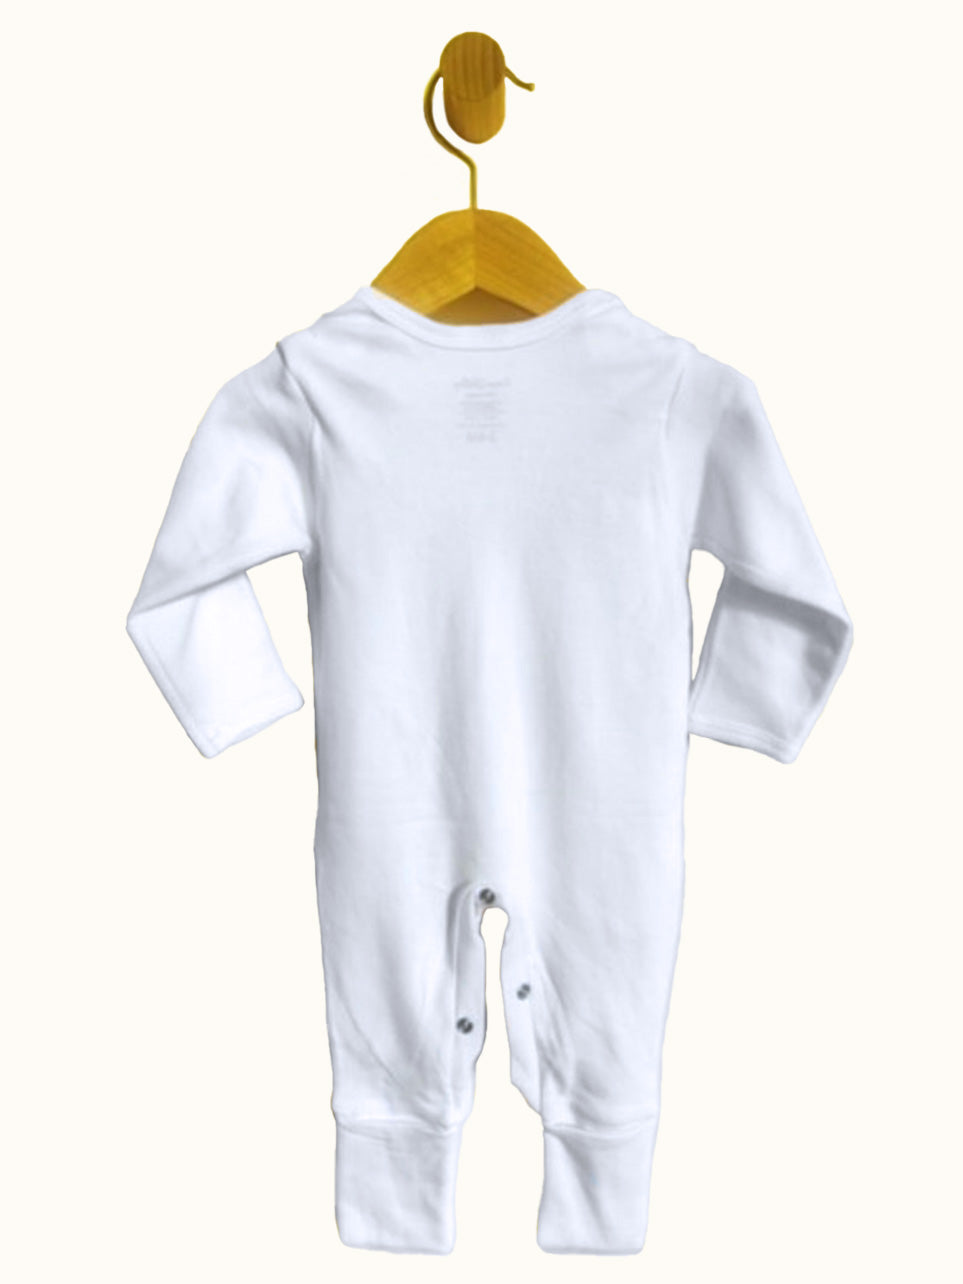 Back view of white long sleeve Baby Bodysuit with pacifier strap and snap crotch